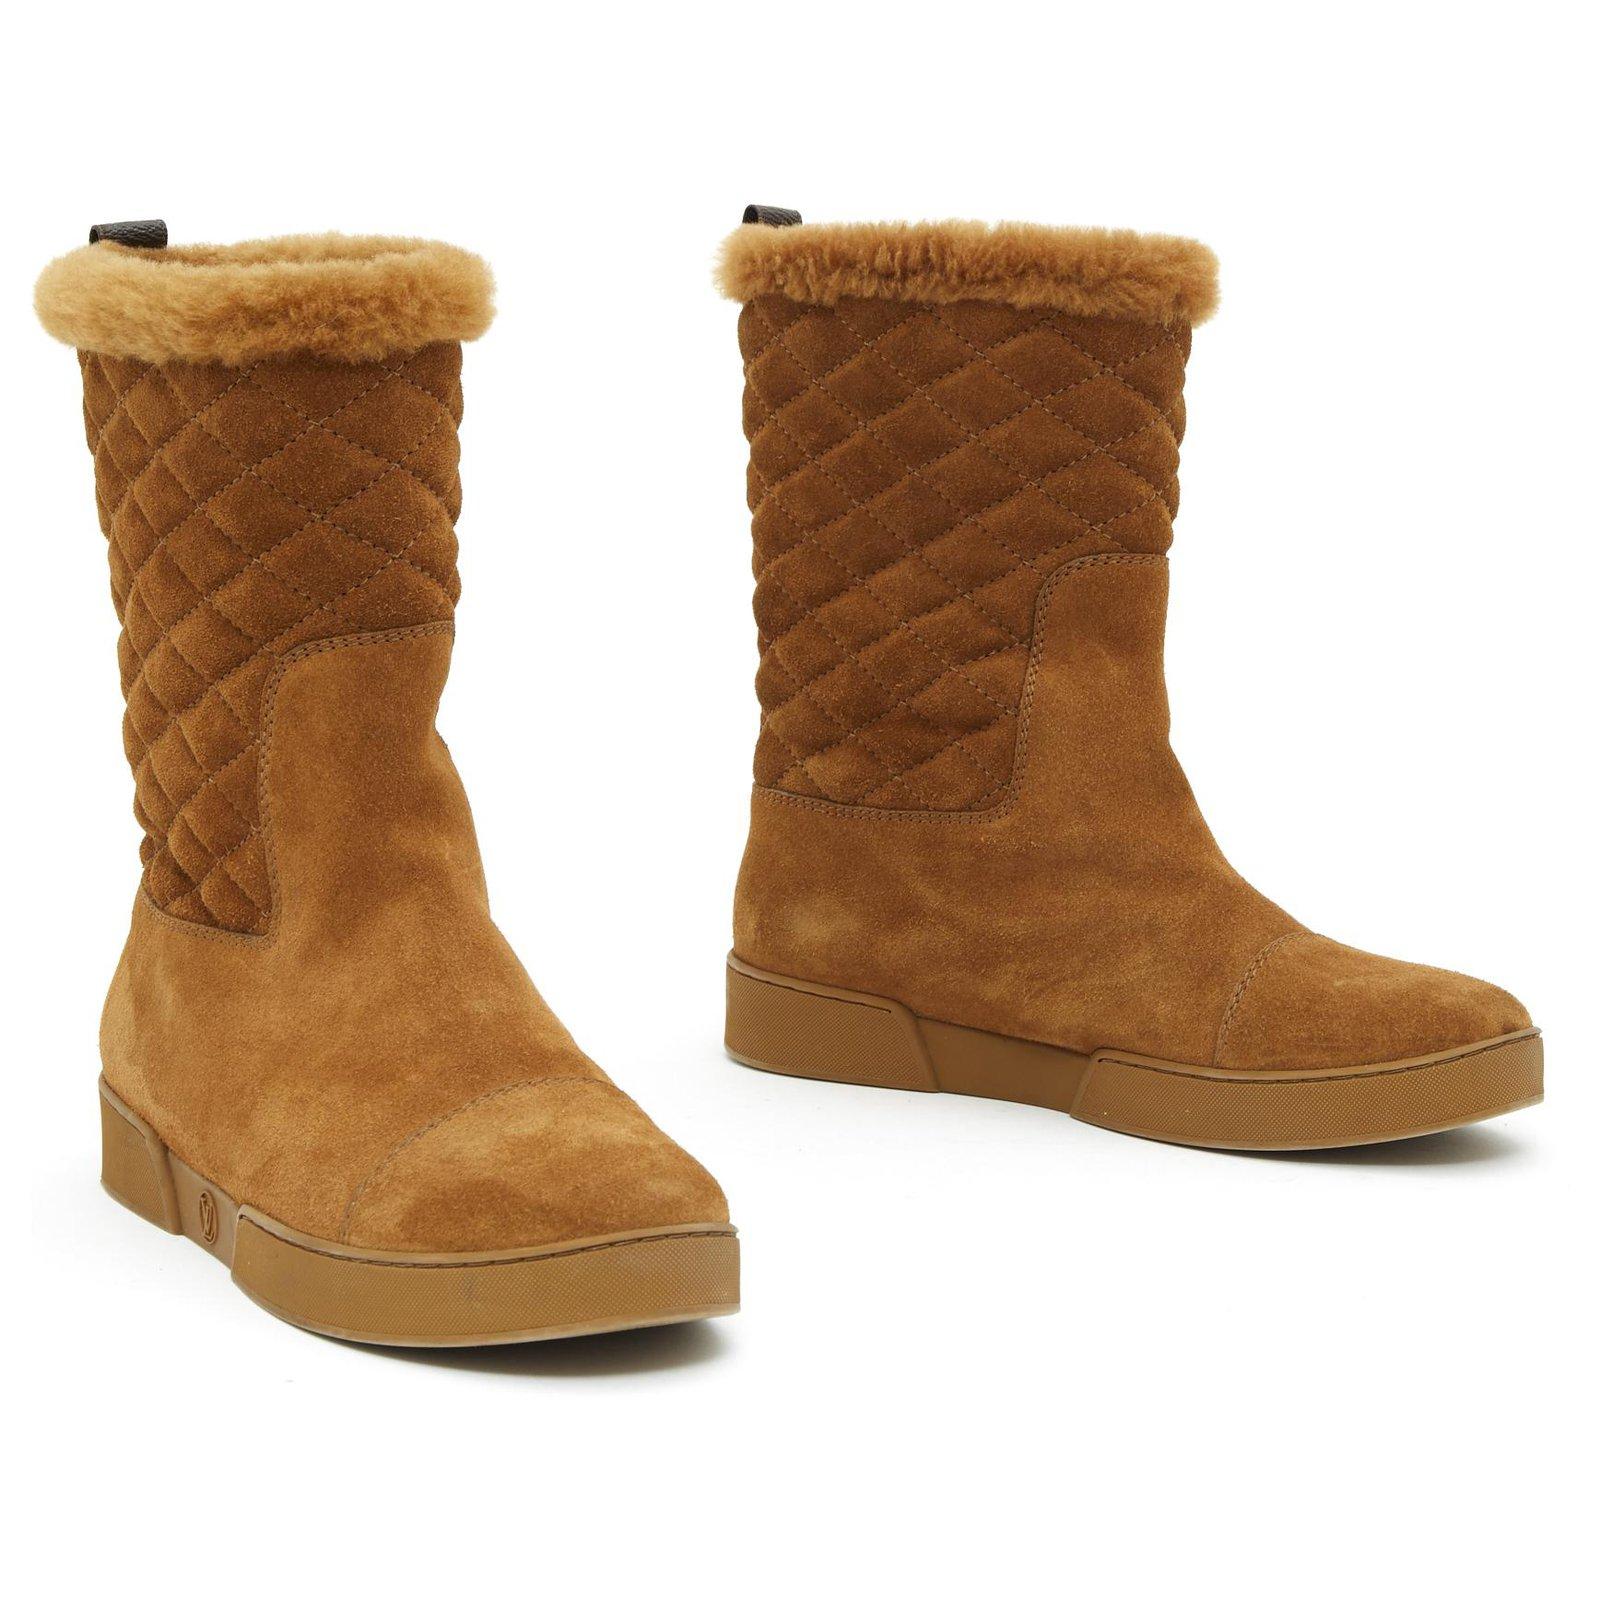 Louis Vuitton mid-high boots in camel suede and fur (sheepskin), round toe, matching rubber sole, brown Vuitton monogram canvas upper. Size 37FR, insole 23.5 cm, upper 25 cm (total rear height). The boots are in perfect condition, UGG style in